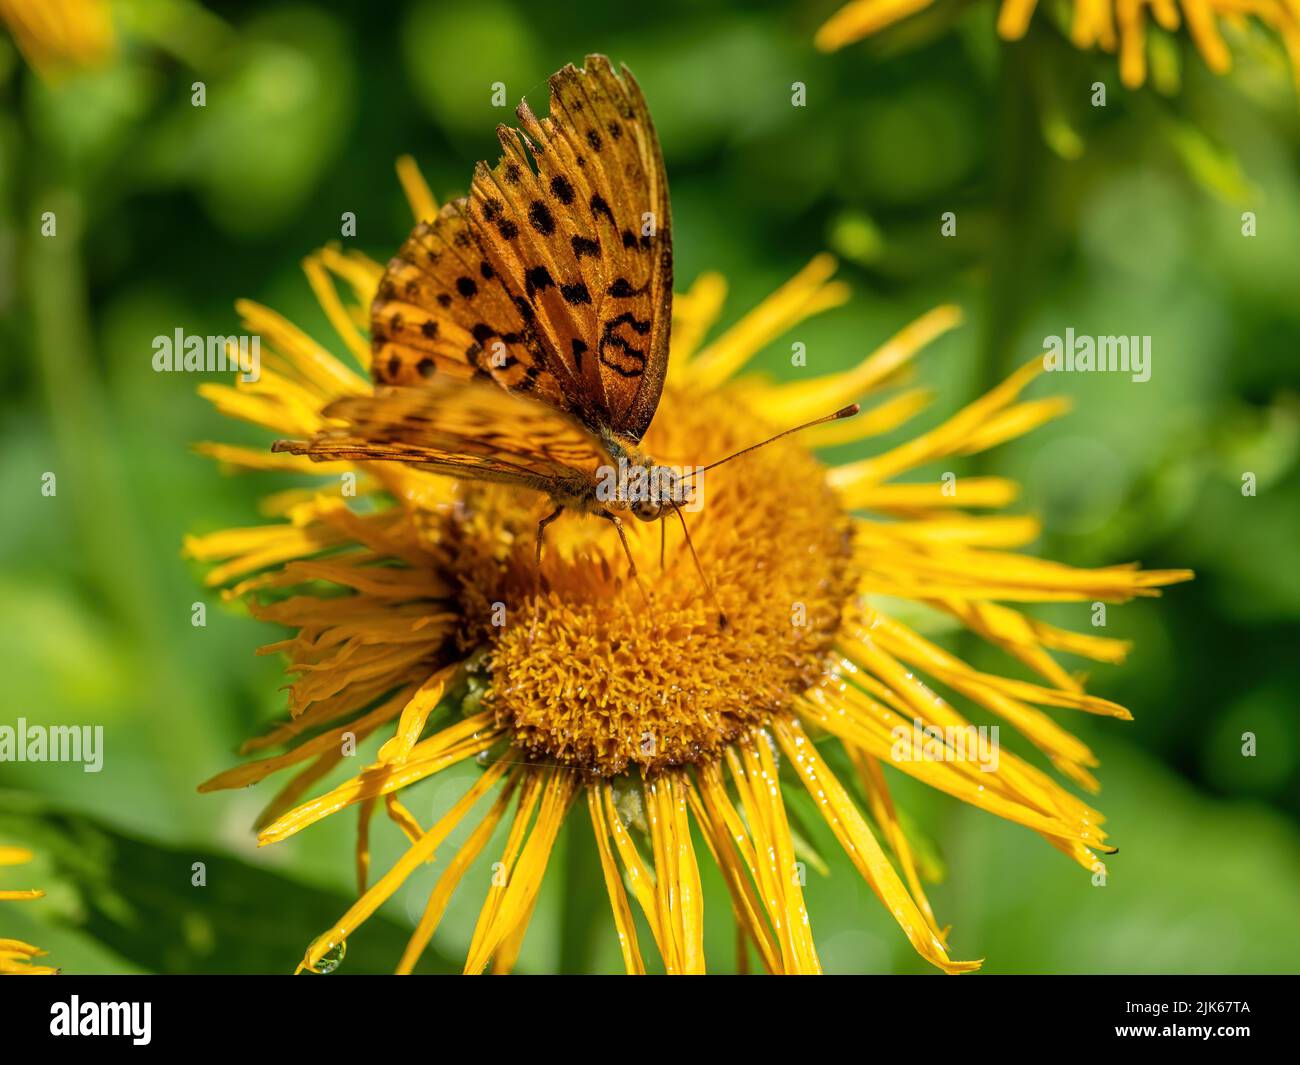 butterfly on yellow flower close up Stock Photo